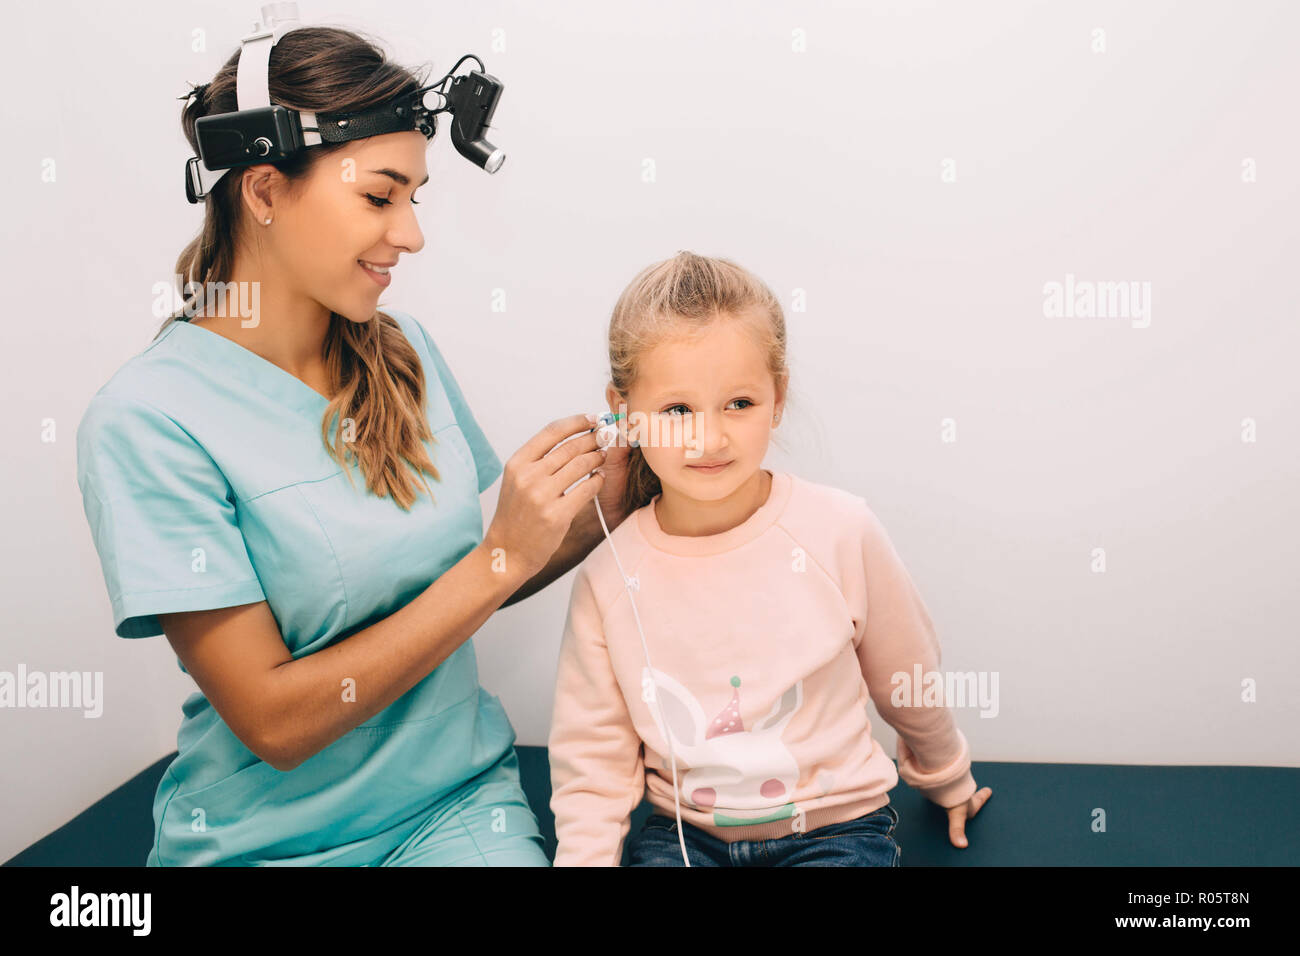 doctor check a girl's ears. Hearing exam at doctors office Stock Photo